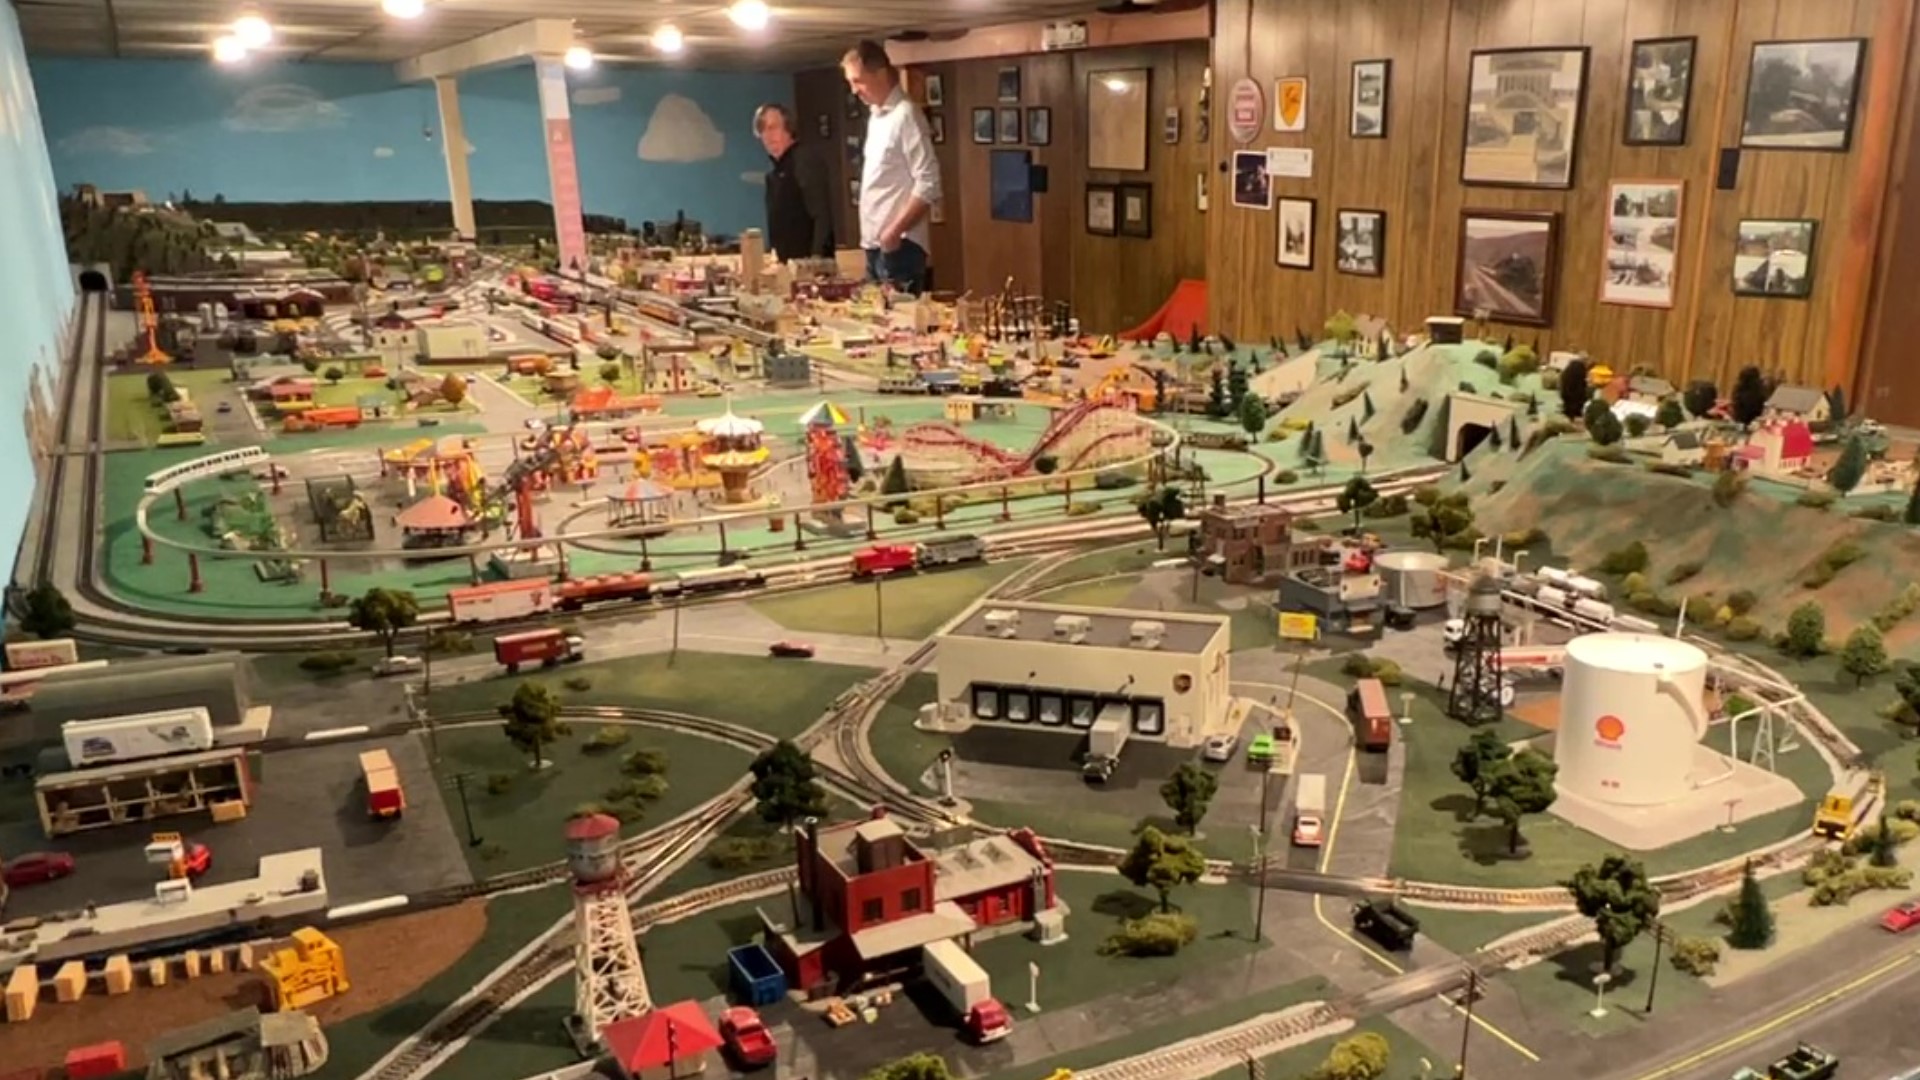 For a man from Throop, his model trains are not just a holiday hobby. Wait till you see the railroad world he has created.